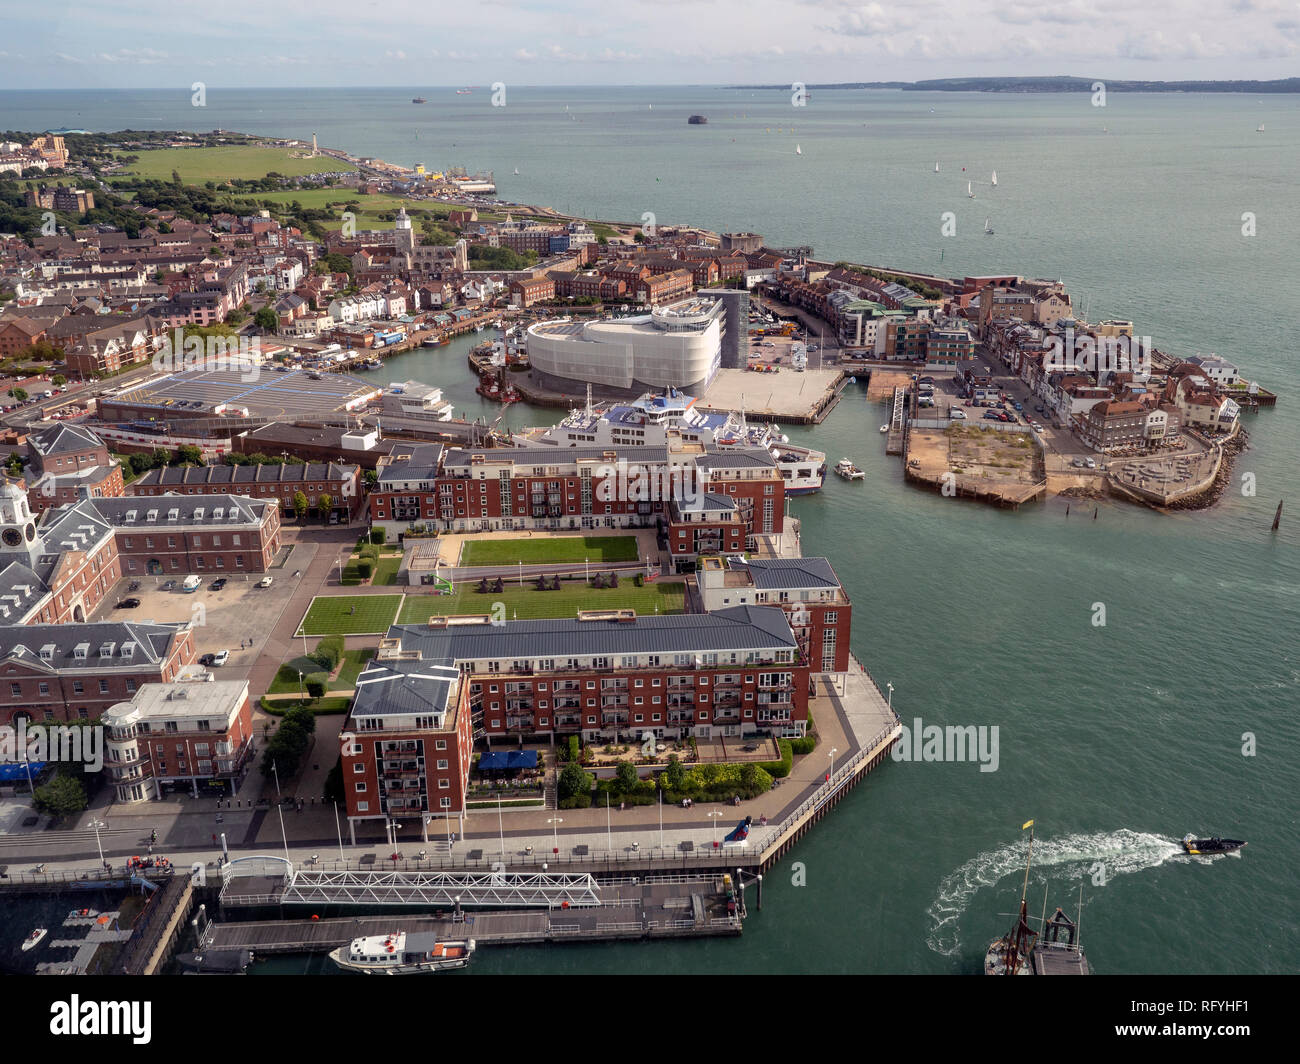 Aerial view of Spice Island, Old Portsmouth, Portsmouth, Hampshire, England, UK. Stock Photo